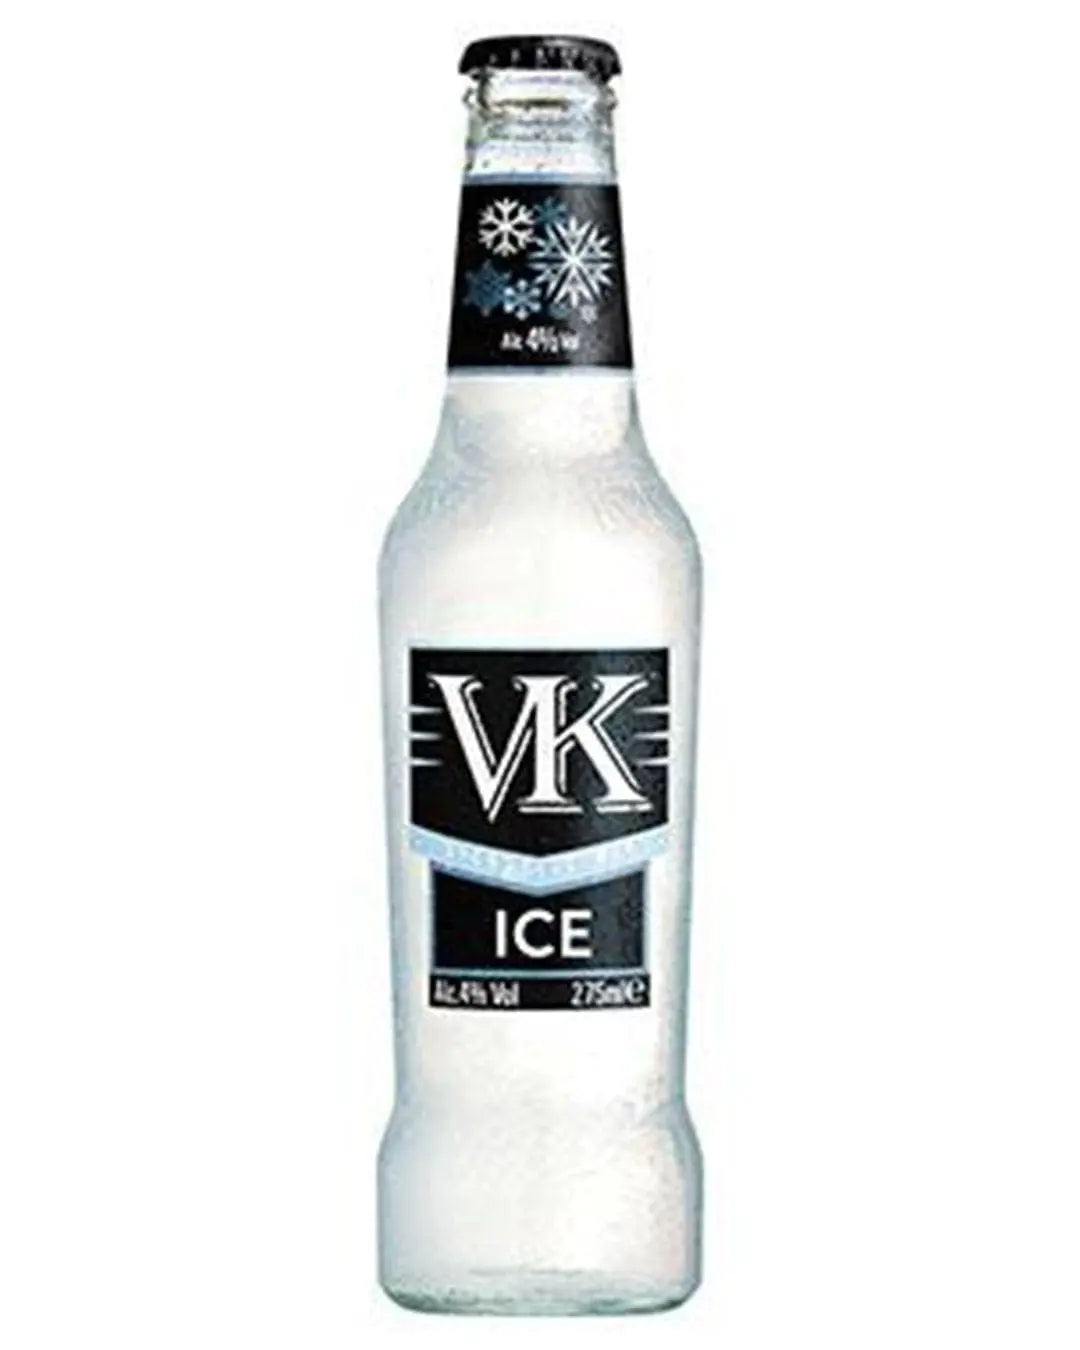 VK Ice Premixed Cocktail Vodka Drink, 275 ml Ready Made Cocktails